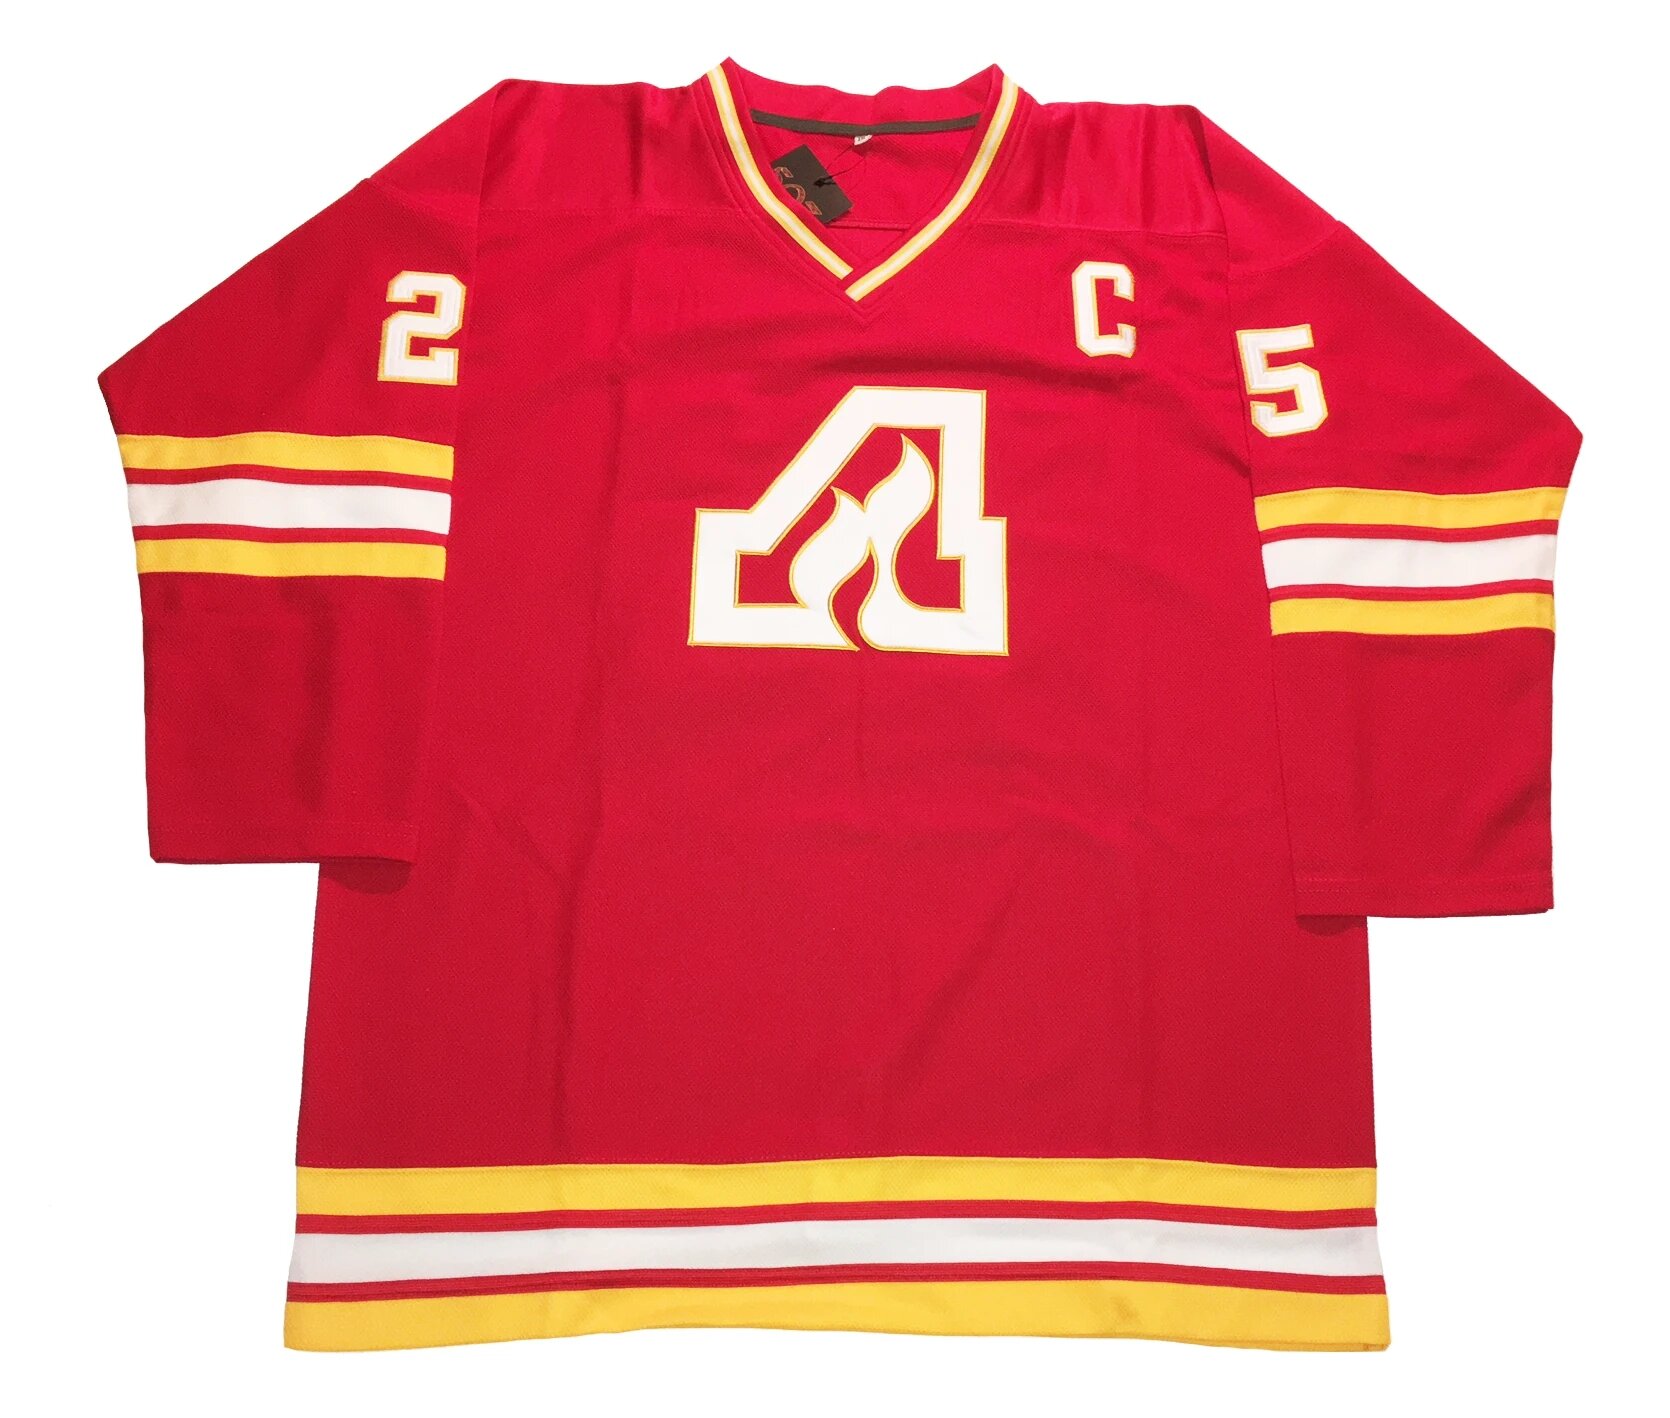 atlanta_flames_red_jersey_front_1024x1024@2x.png.jpg